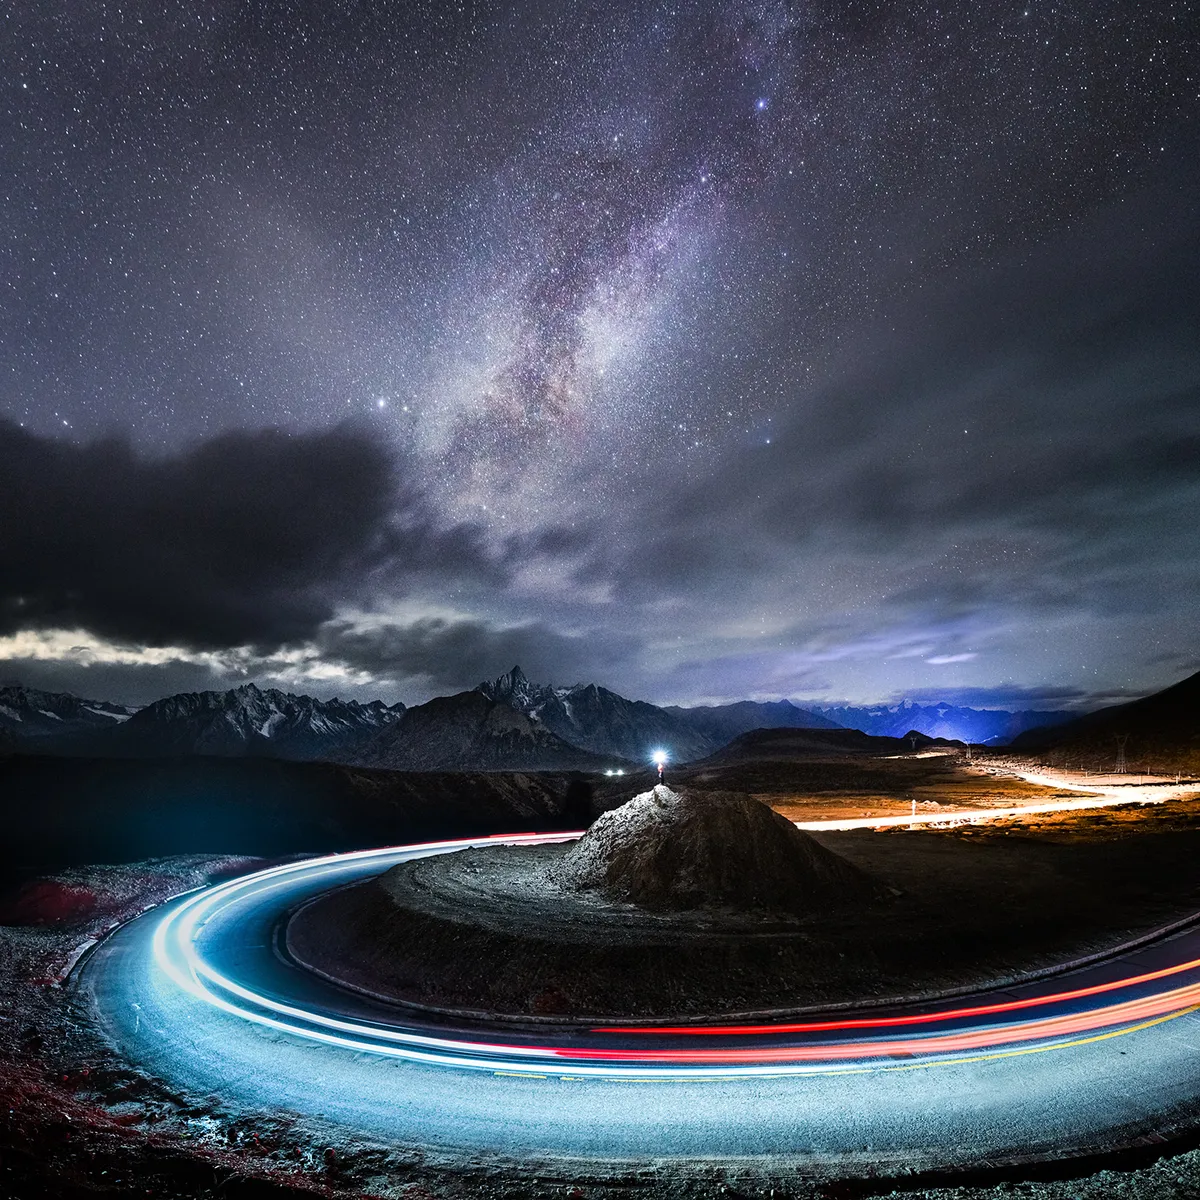 Star Watcher © Yang Sutie (China), Ranwu, Tibet, China, 22 October 2020. Equipment: Nikon Z 7II camera, 17 mm f/2.8 lens. Car lights and figure: ISO 1000, 2 x 25-second exposures. Sky and mountains: ISO 6400, 25-second exposure